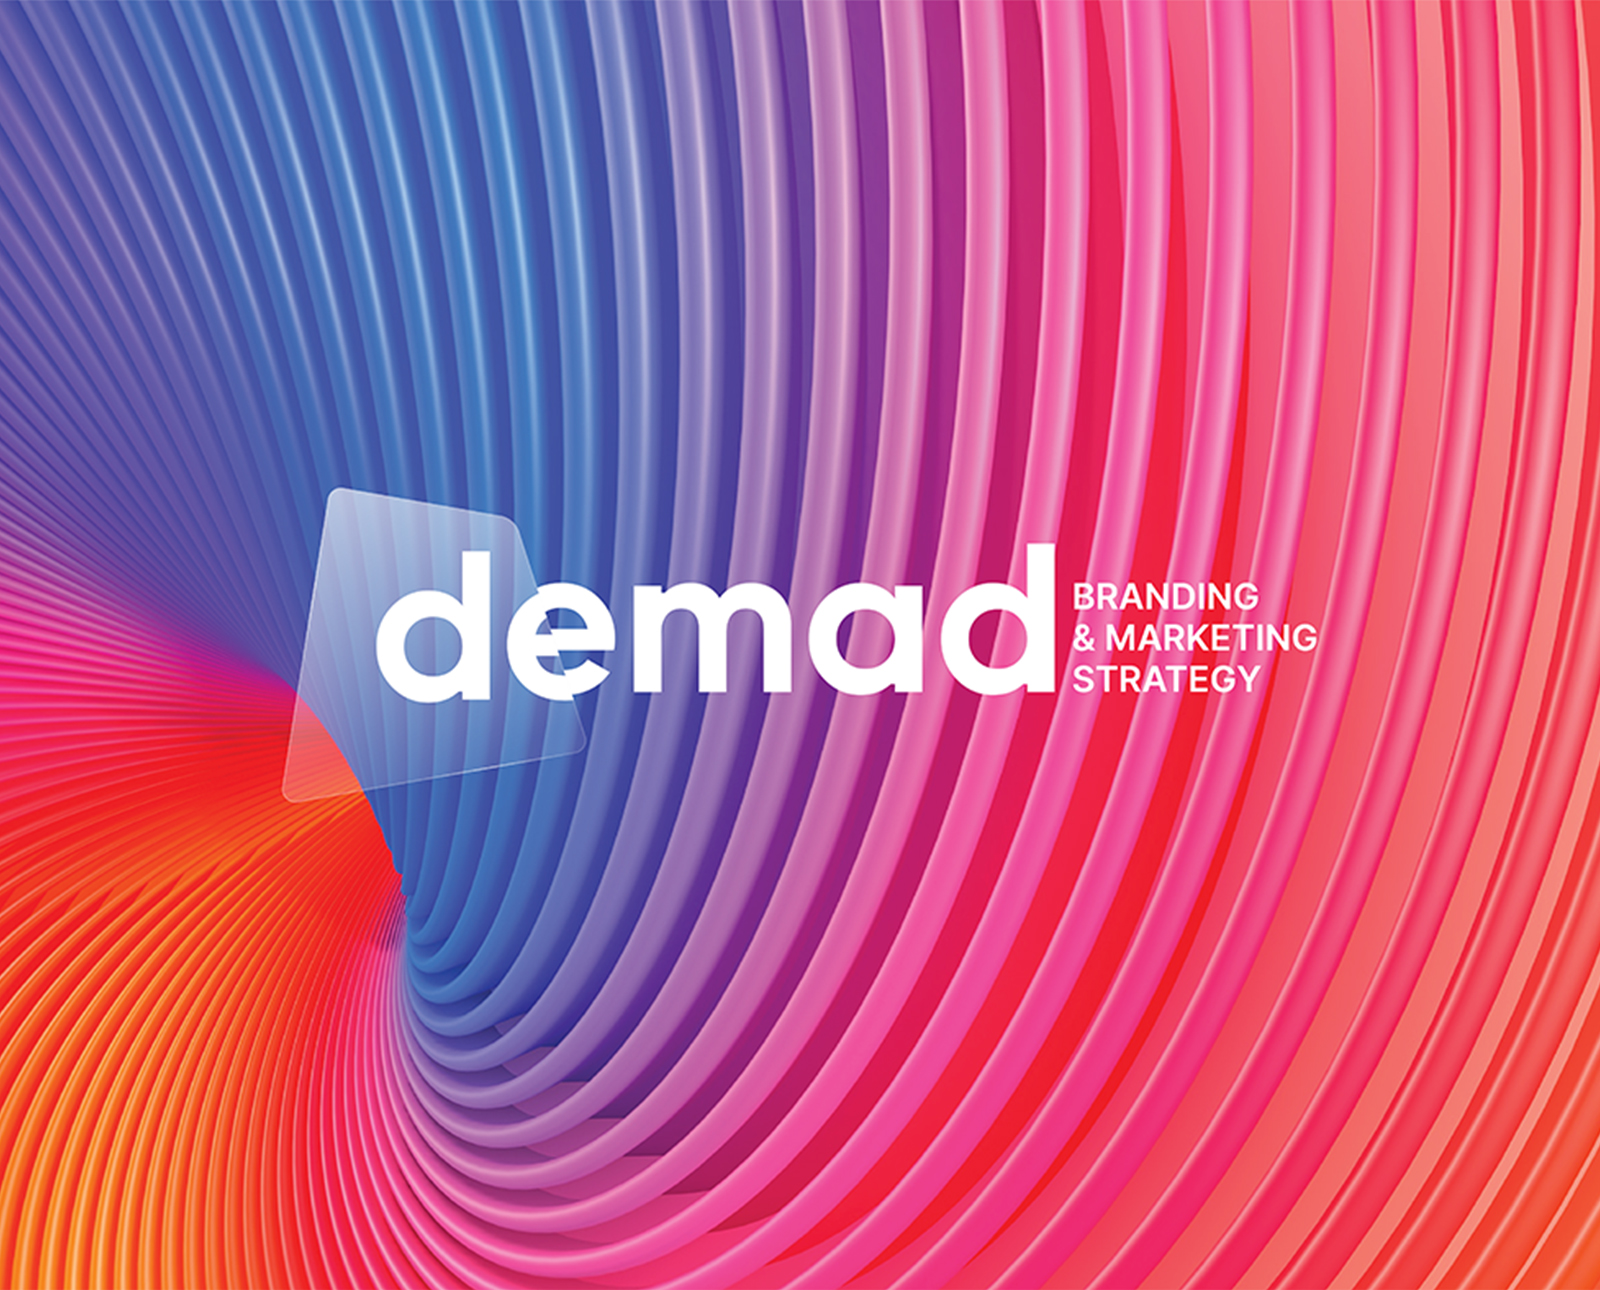 Brand Identity and Visual Identity for Demad Agency